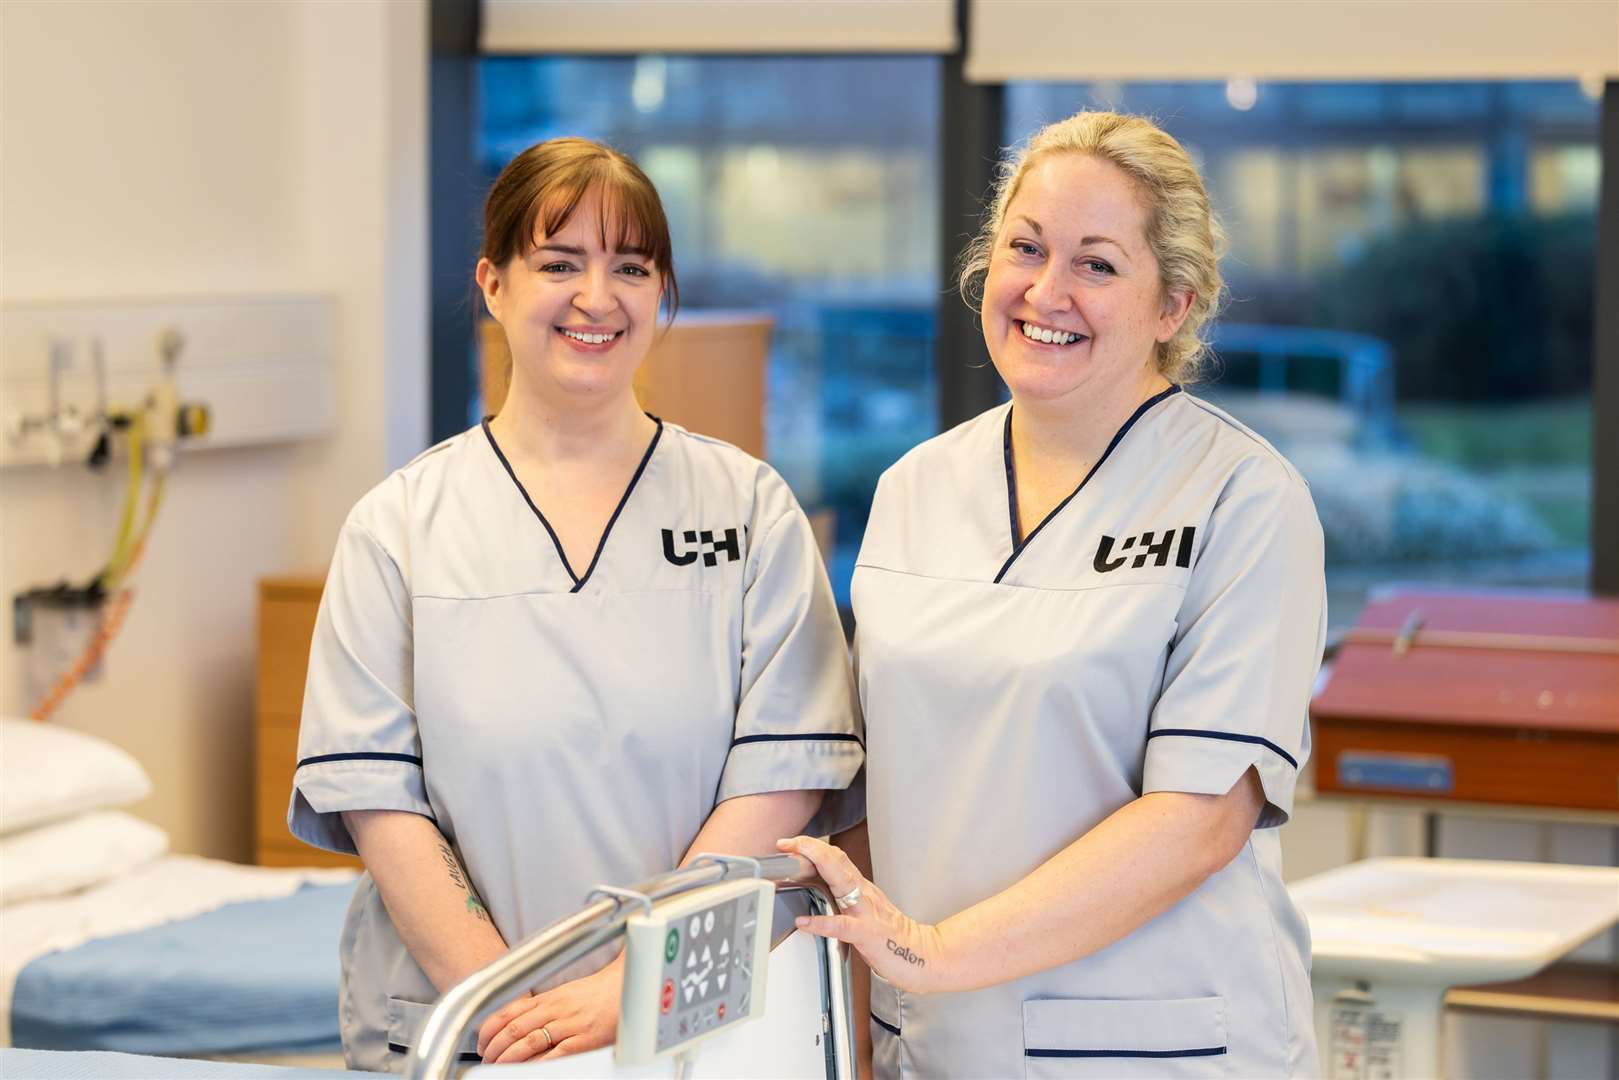 Nursing students Shivonne MacLean and Lou Hyett-Collins in the clinical skills suite at UHI House in Inverness.